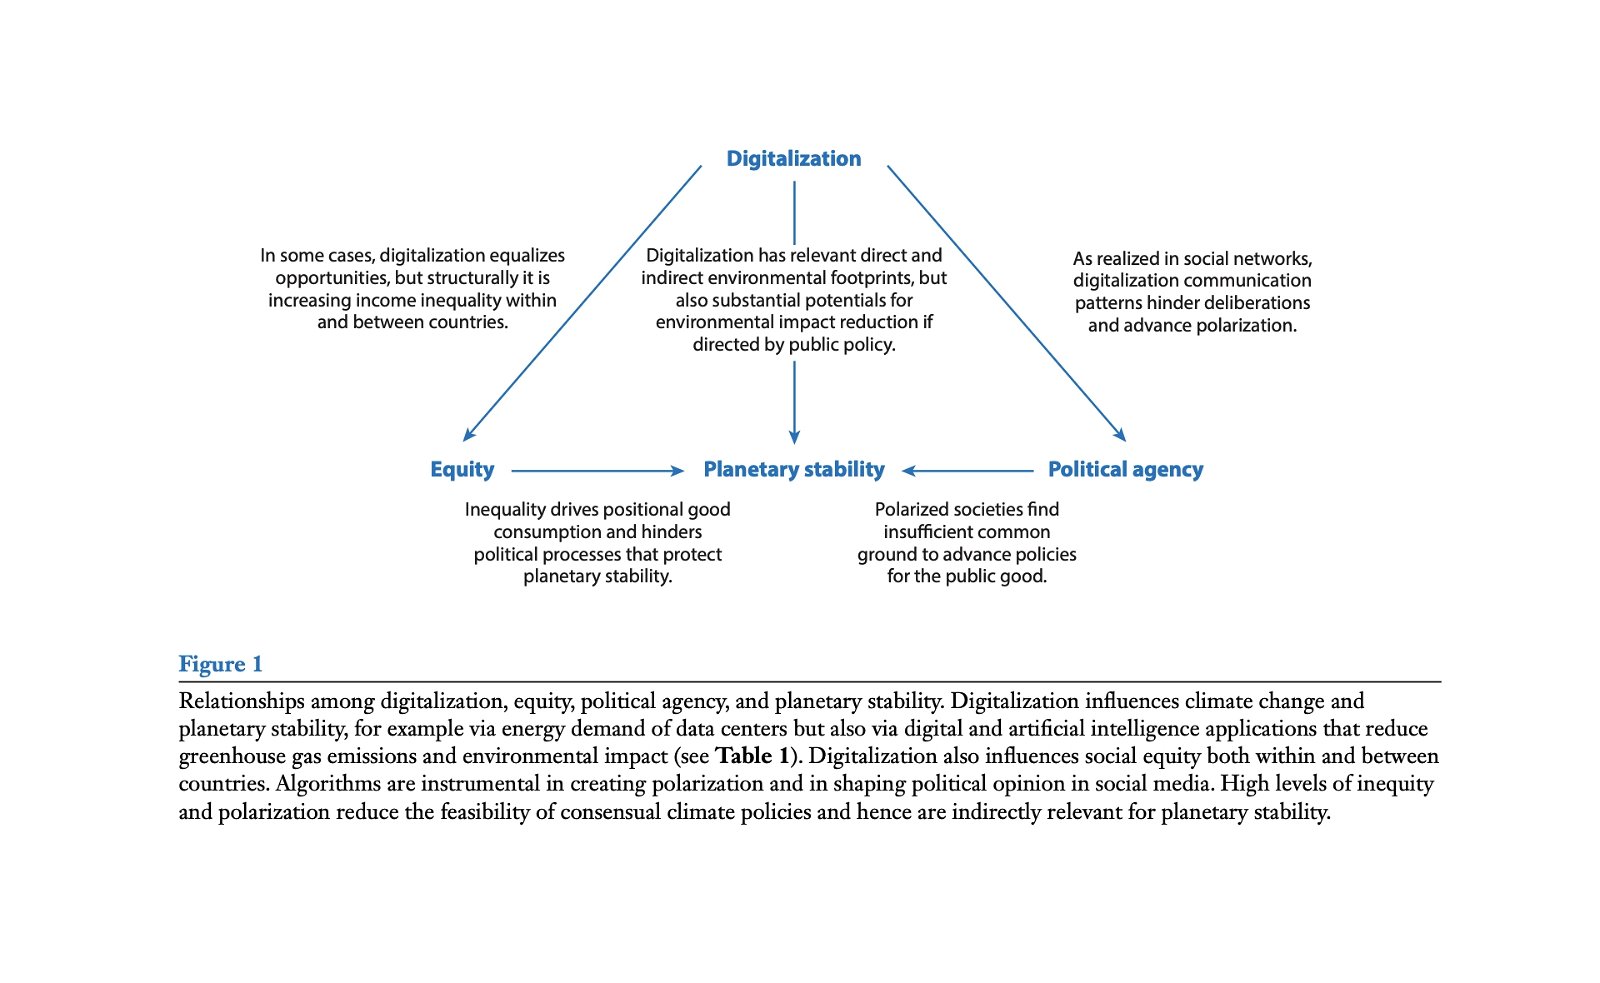 relationships among digitalization, equity, planetary stability, and political agency